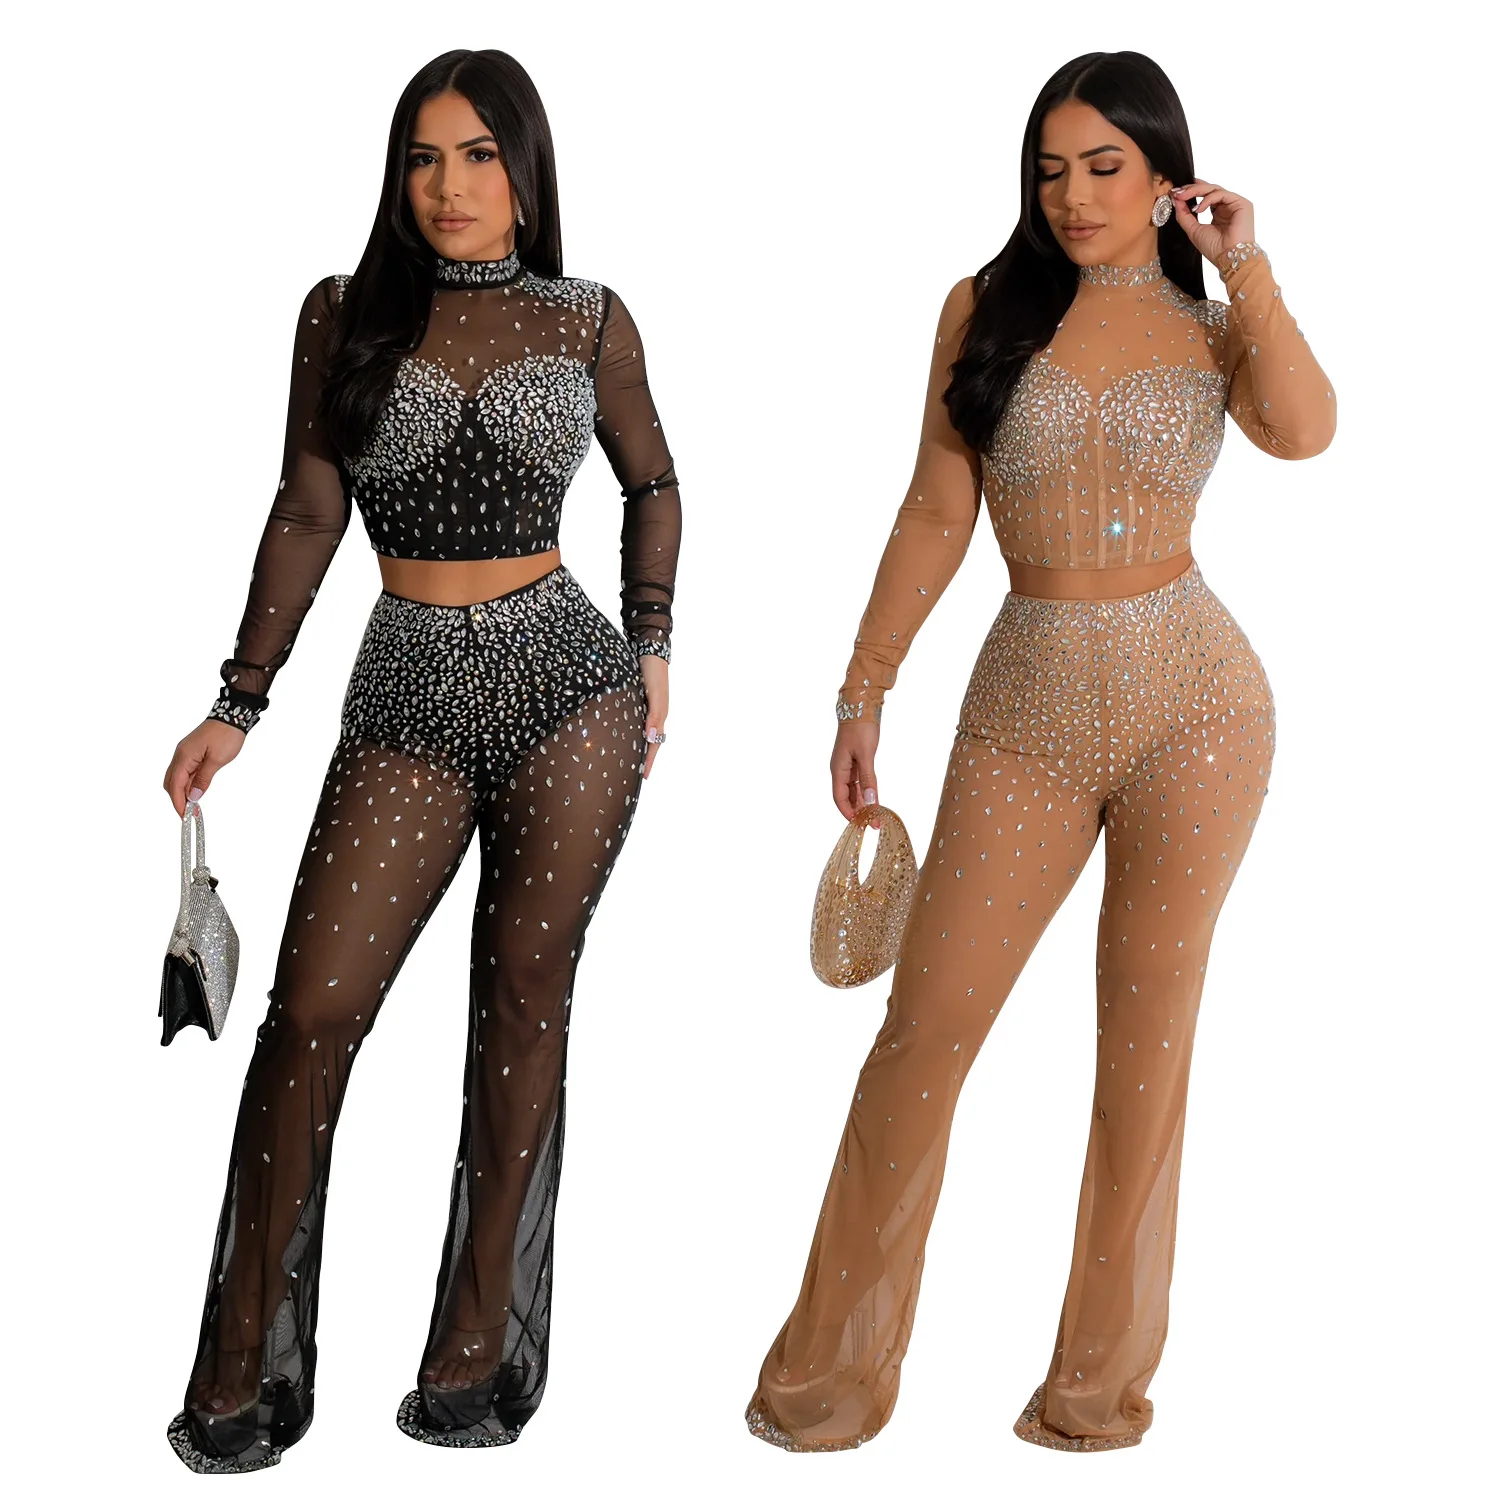 EINYOO Y2k Rhinestone Mesh See Through Long Sleeve Dresses Set for Women Birthday Sexy Night Club Party 2 Piece Sets Outfit Traf pearl rhinestone maternity photography stretchy tulle crystal skinny photo shoot tassel dresses full sleeve